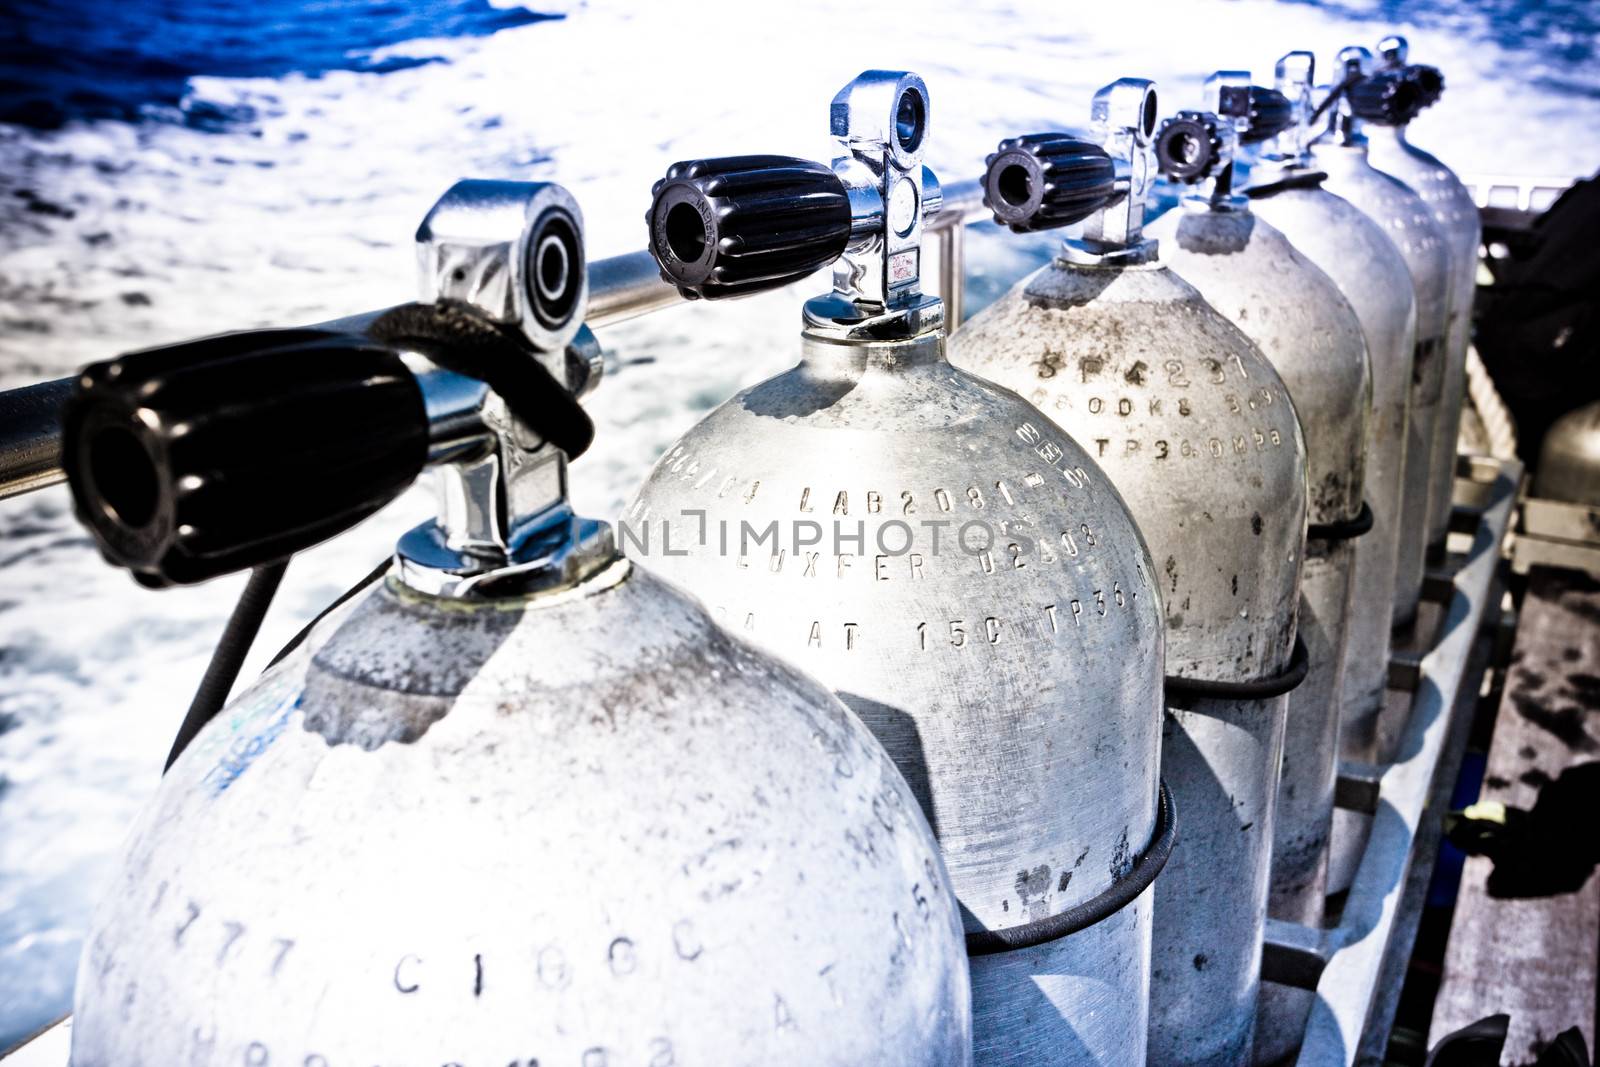 Rows of air tanks with attached valves for scuba diving lined up on the deck of a dive ship in mid ocean